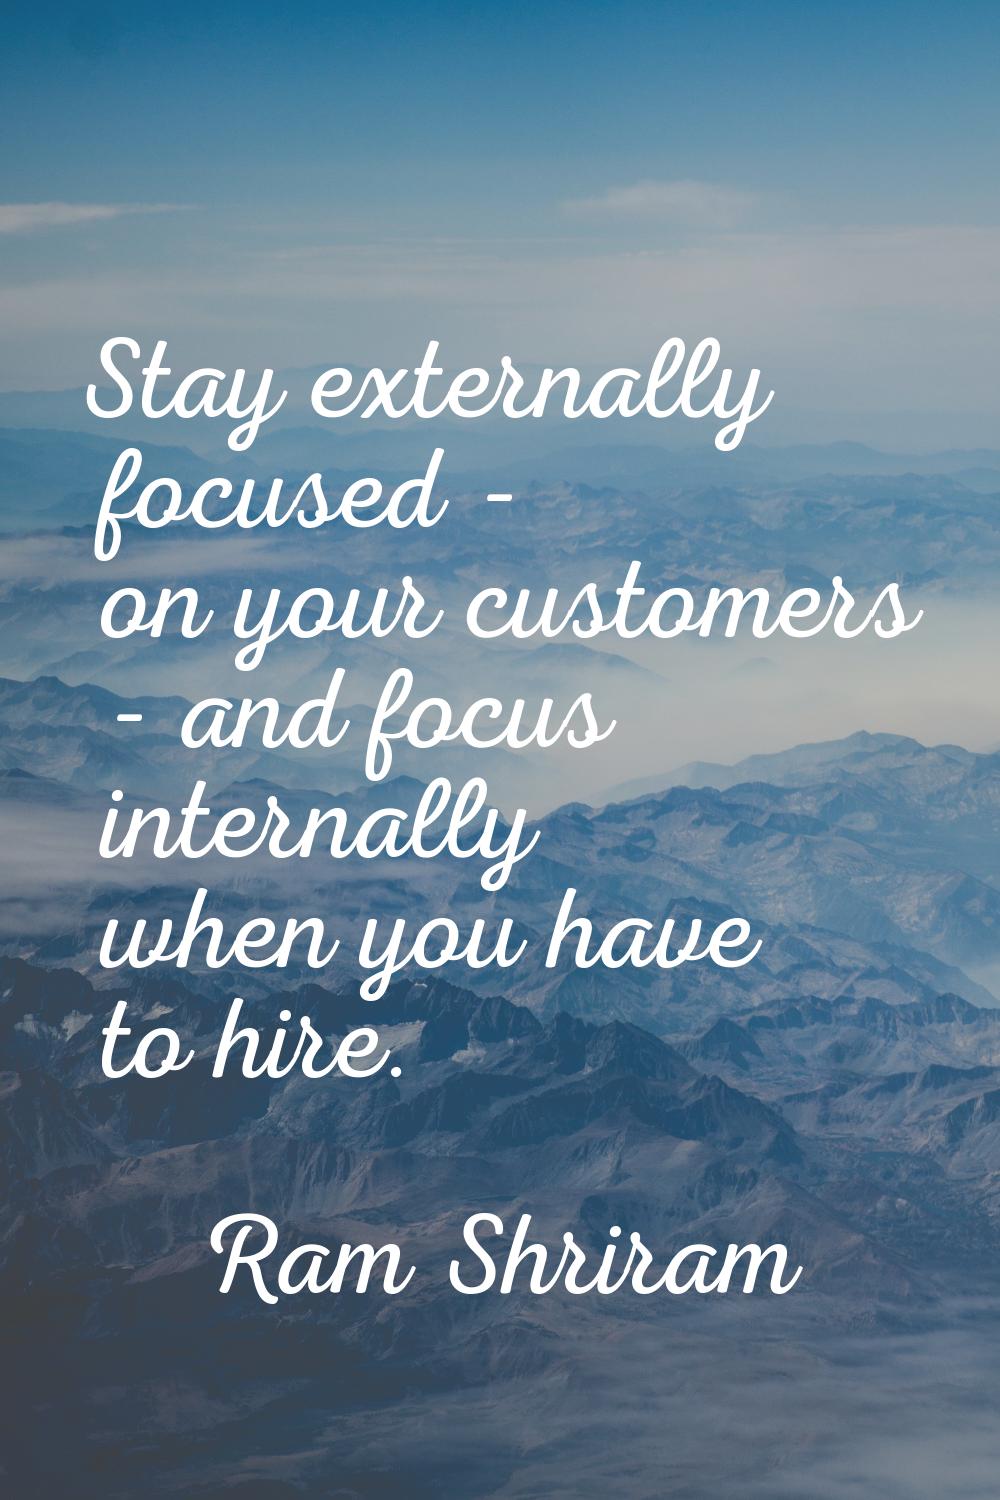 Stay externally focused - on your customers - and focus internally when you have to hire.